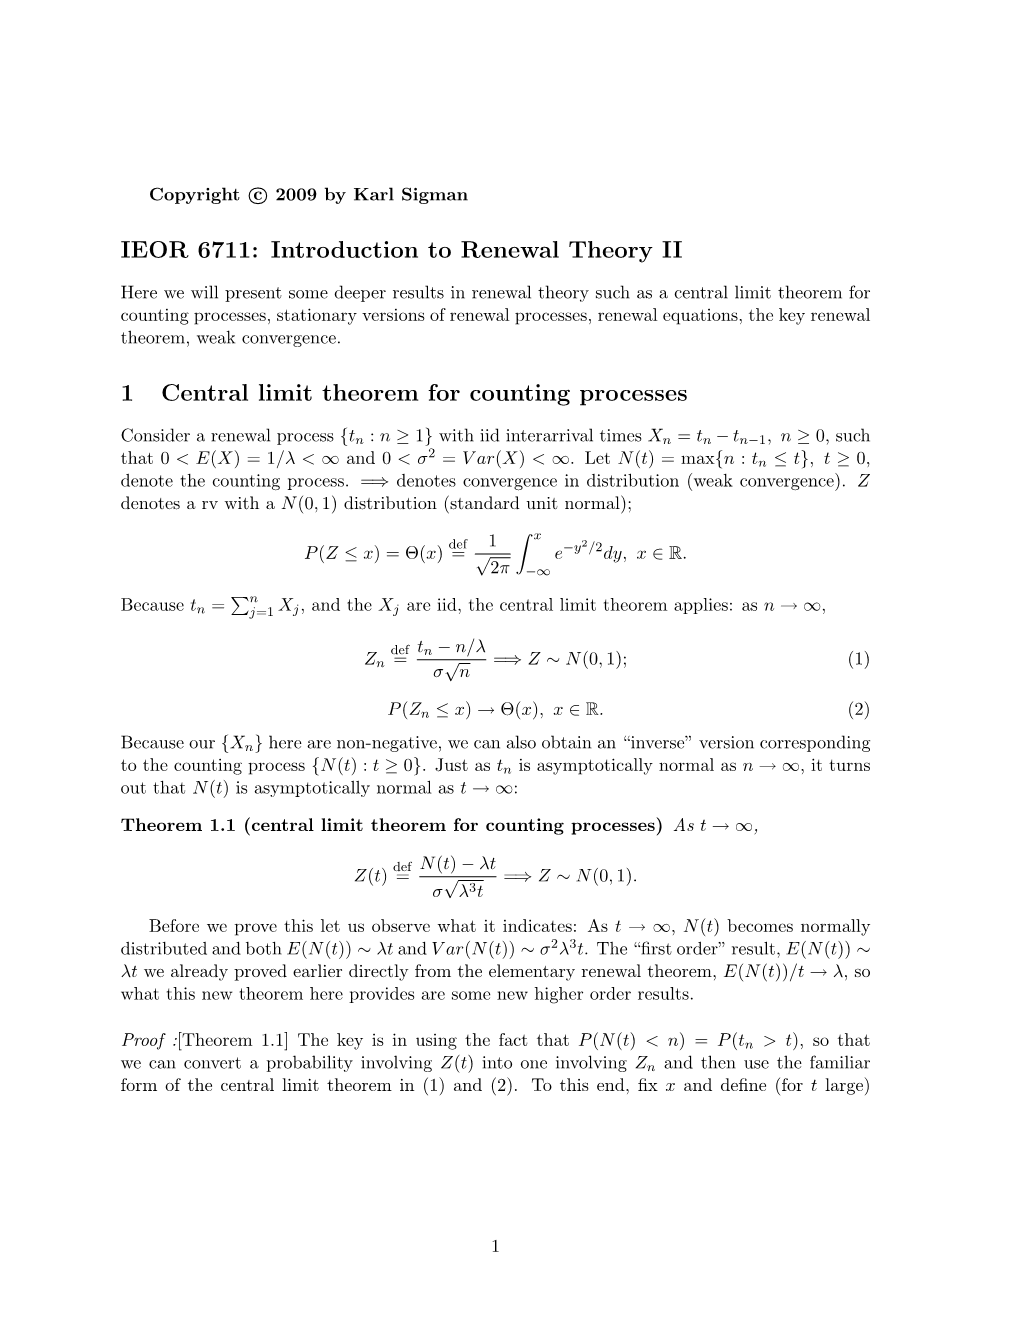 IEOR 6711: Introduction to Renewal Theory II 1 Central Limit Theorem for Counting Processes